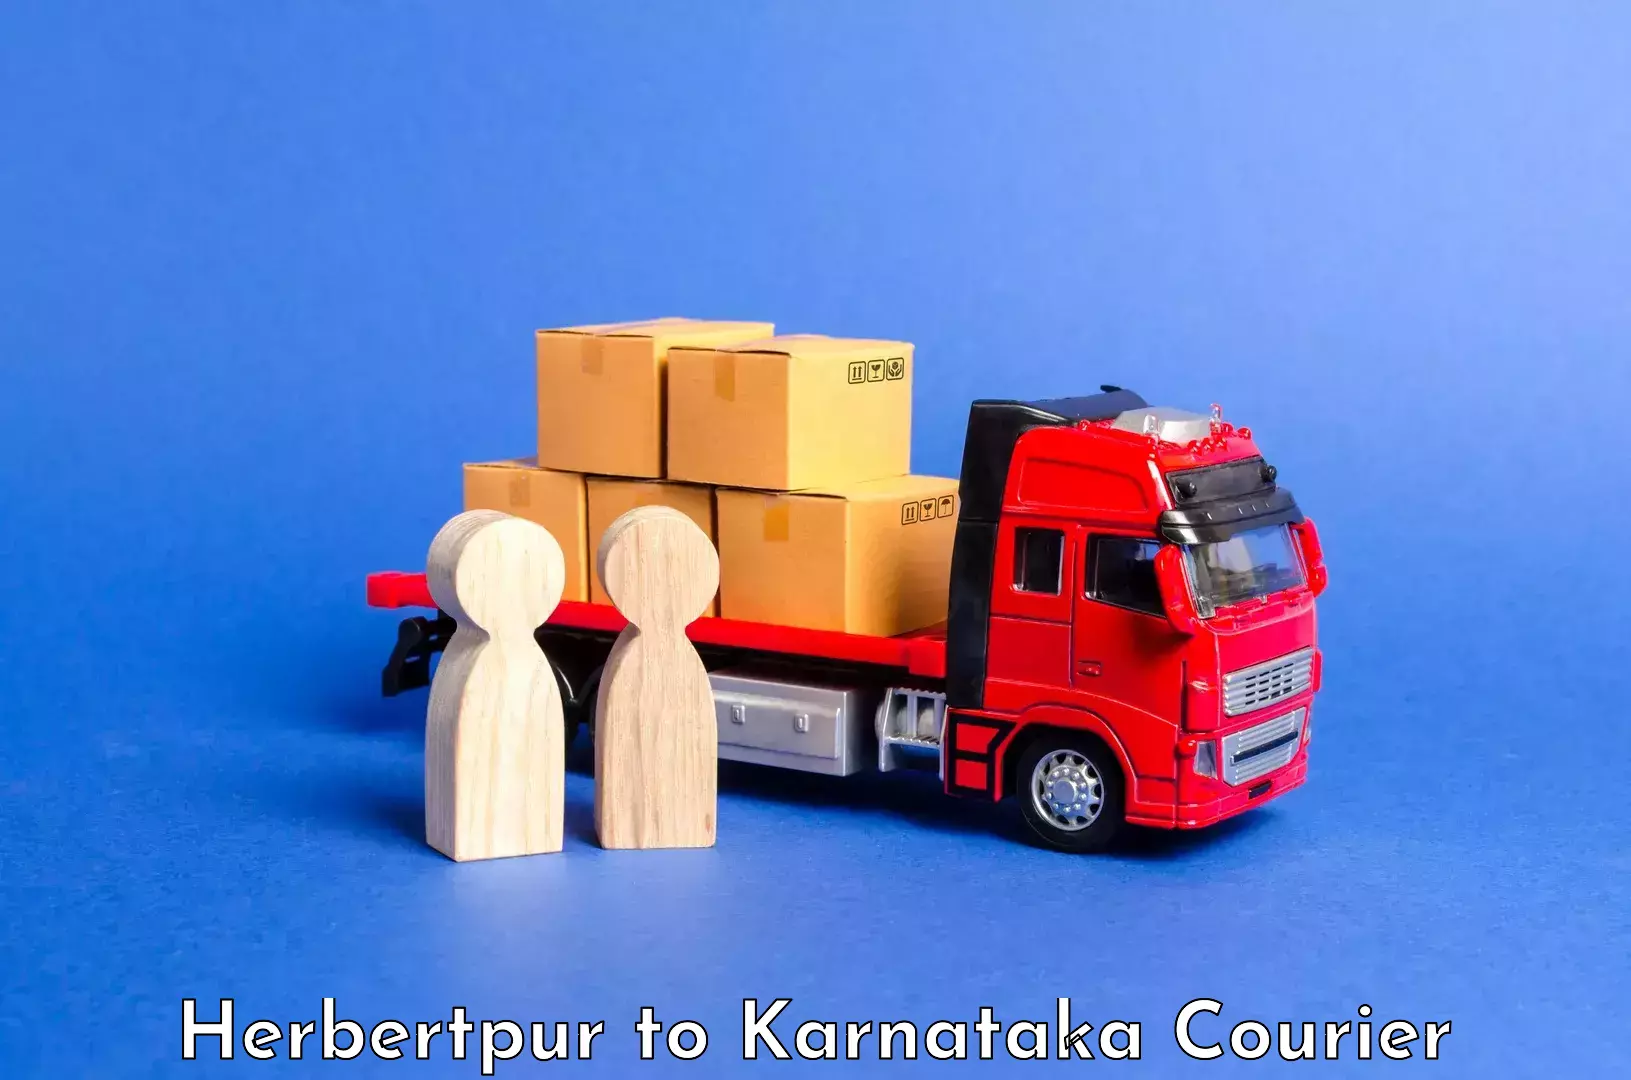 Luggage transport consultancy Herbertpur to Mulbagal